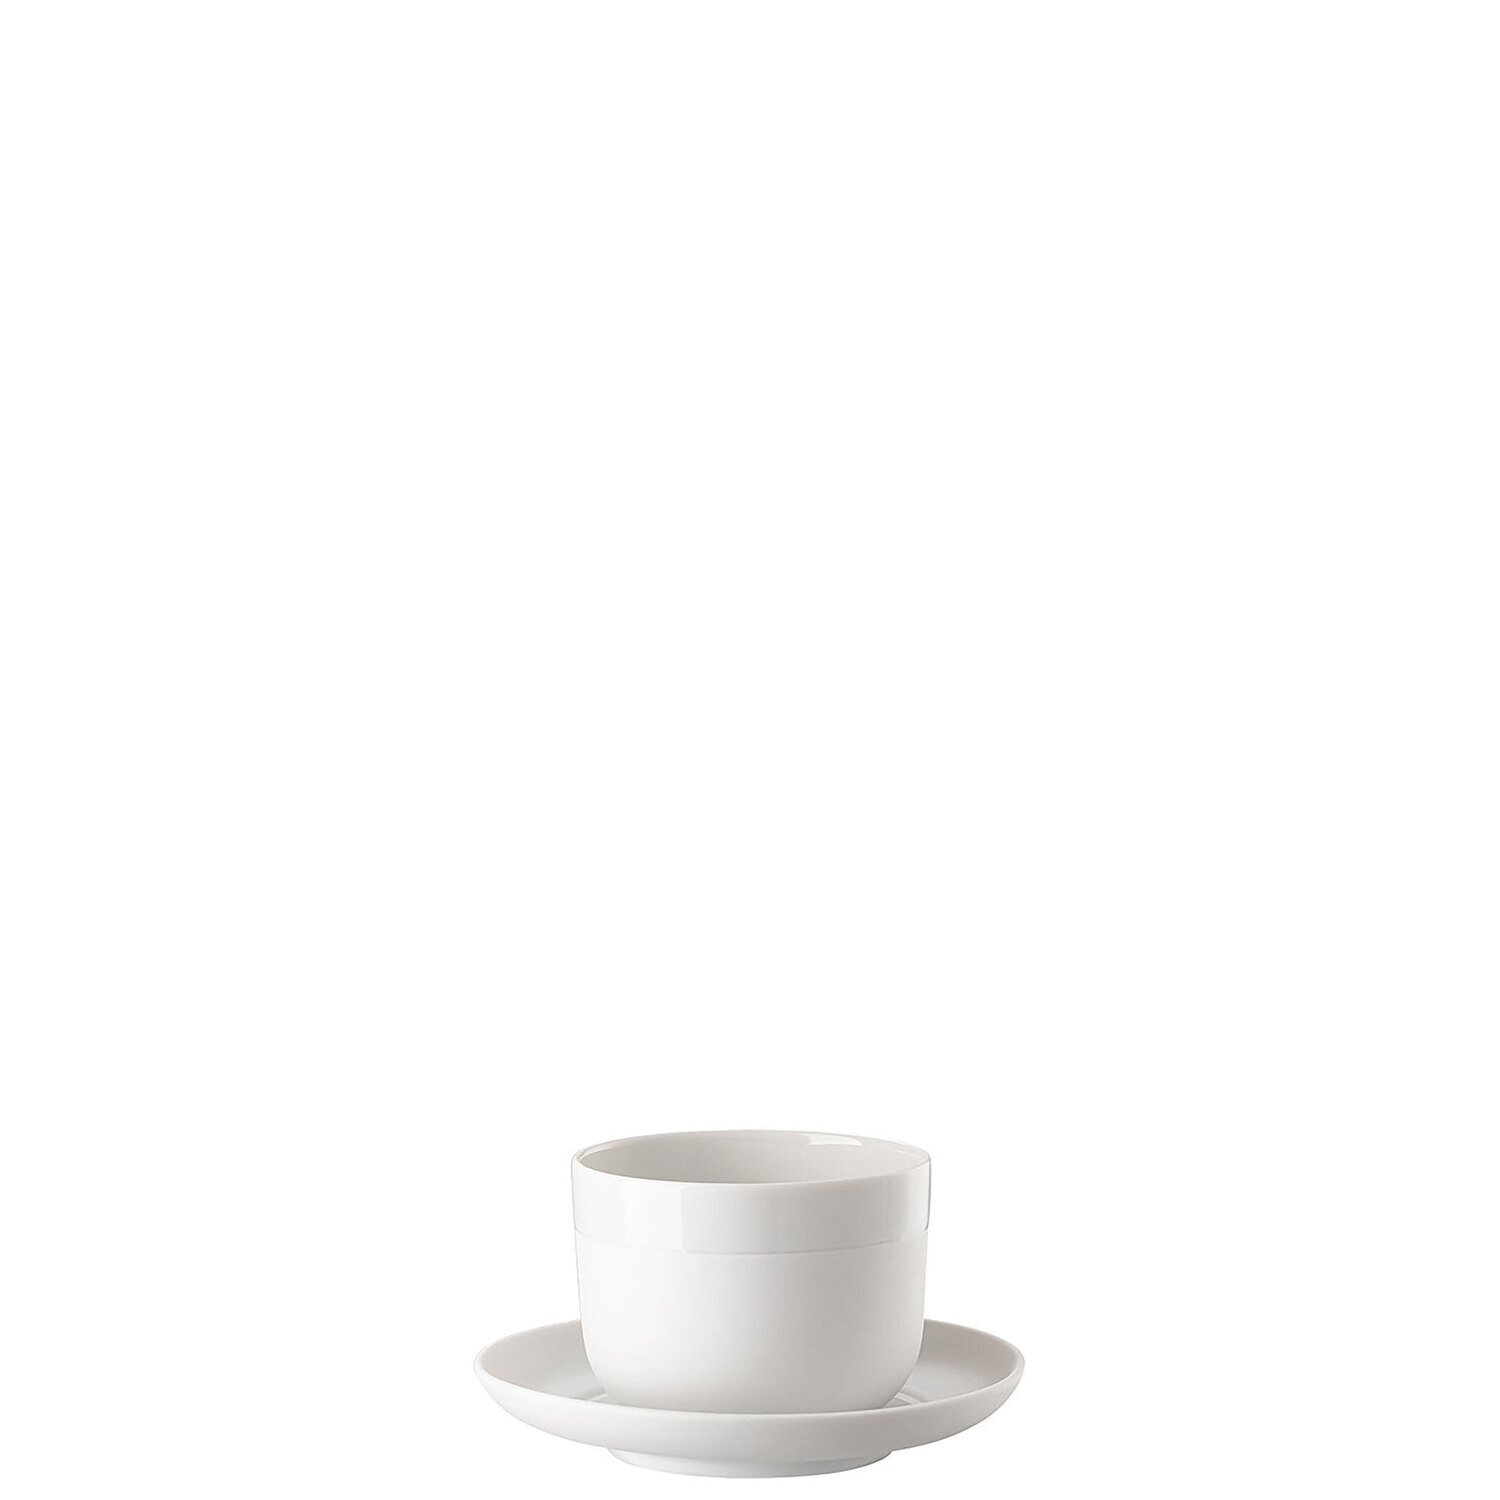 Rosenthal Cappello White Tea Cup &amp; Saucer 7 oz., 5 Inch